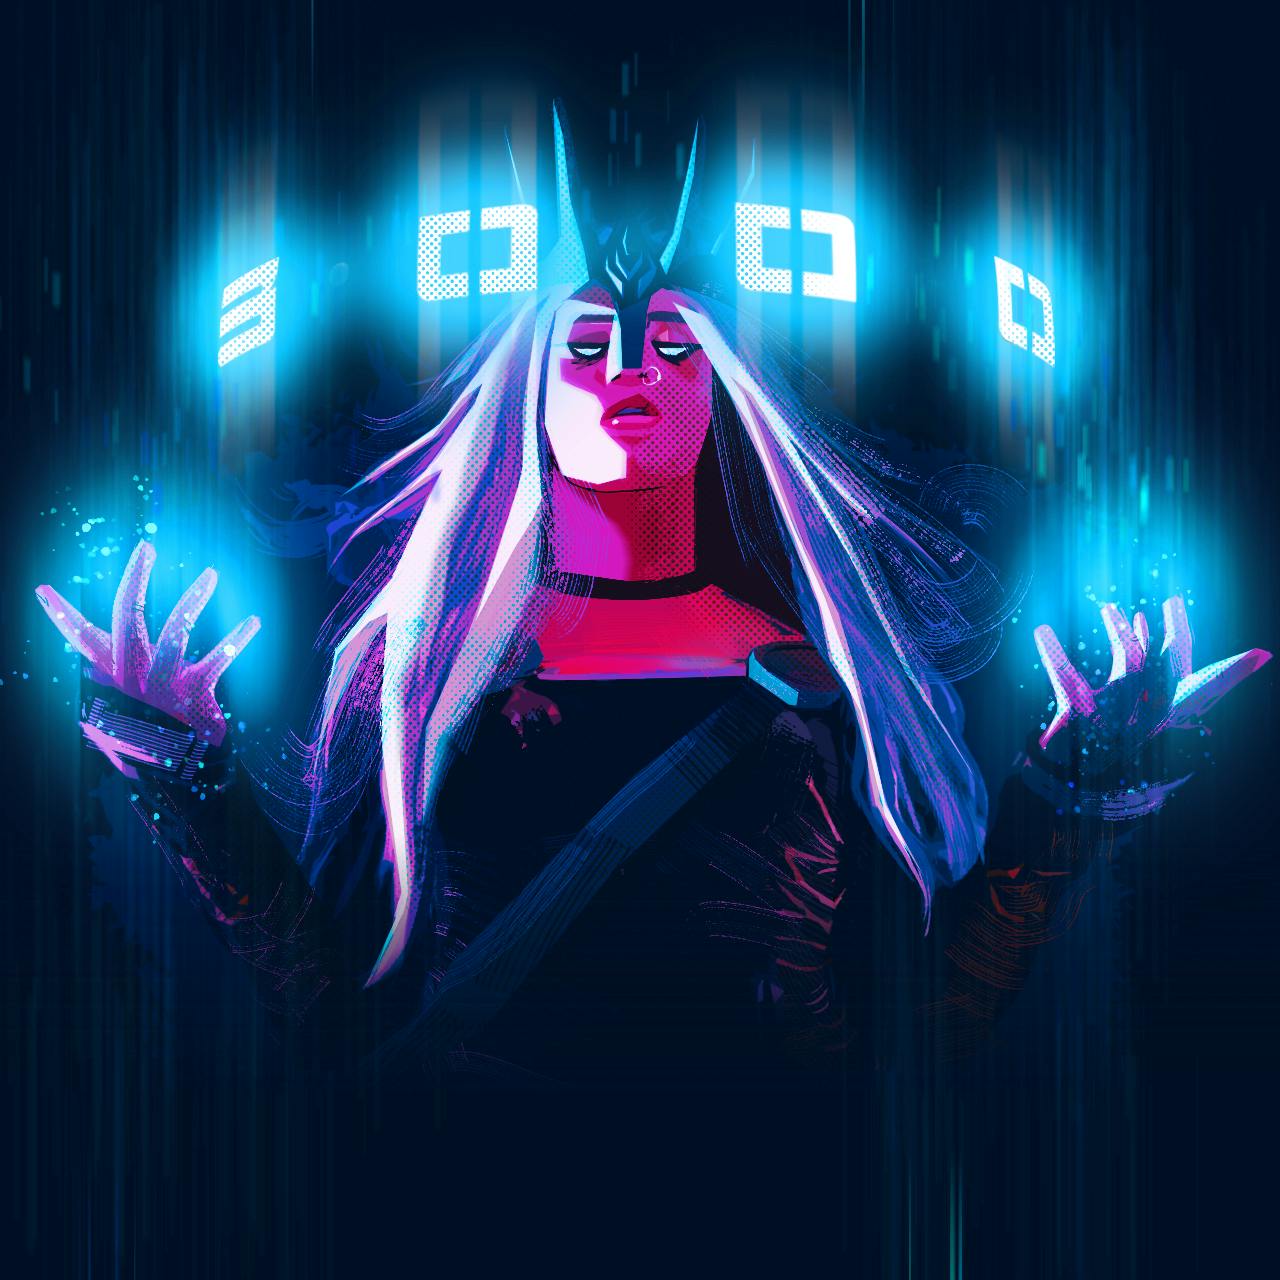 An illustration of a sorceress floating the numbers 3000 above her head